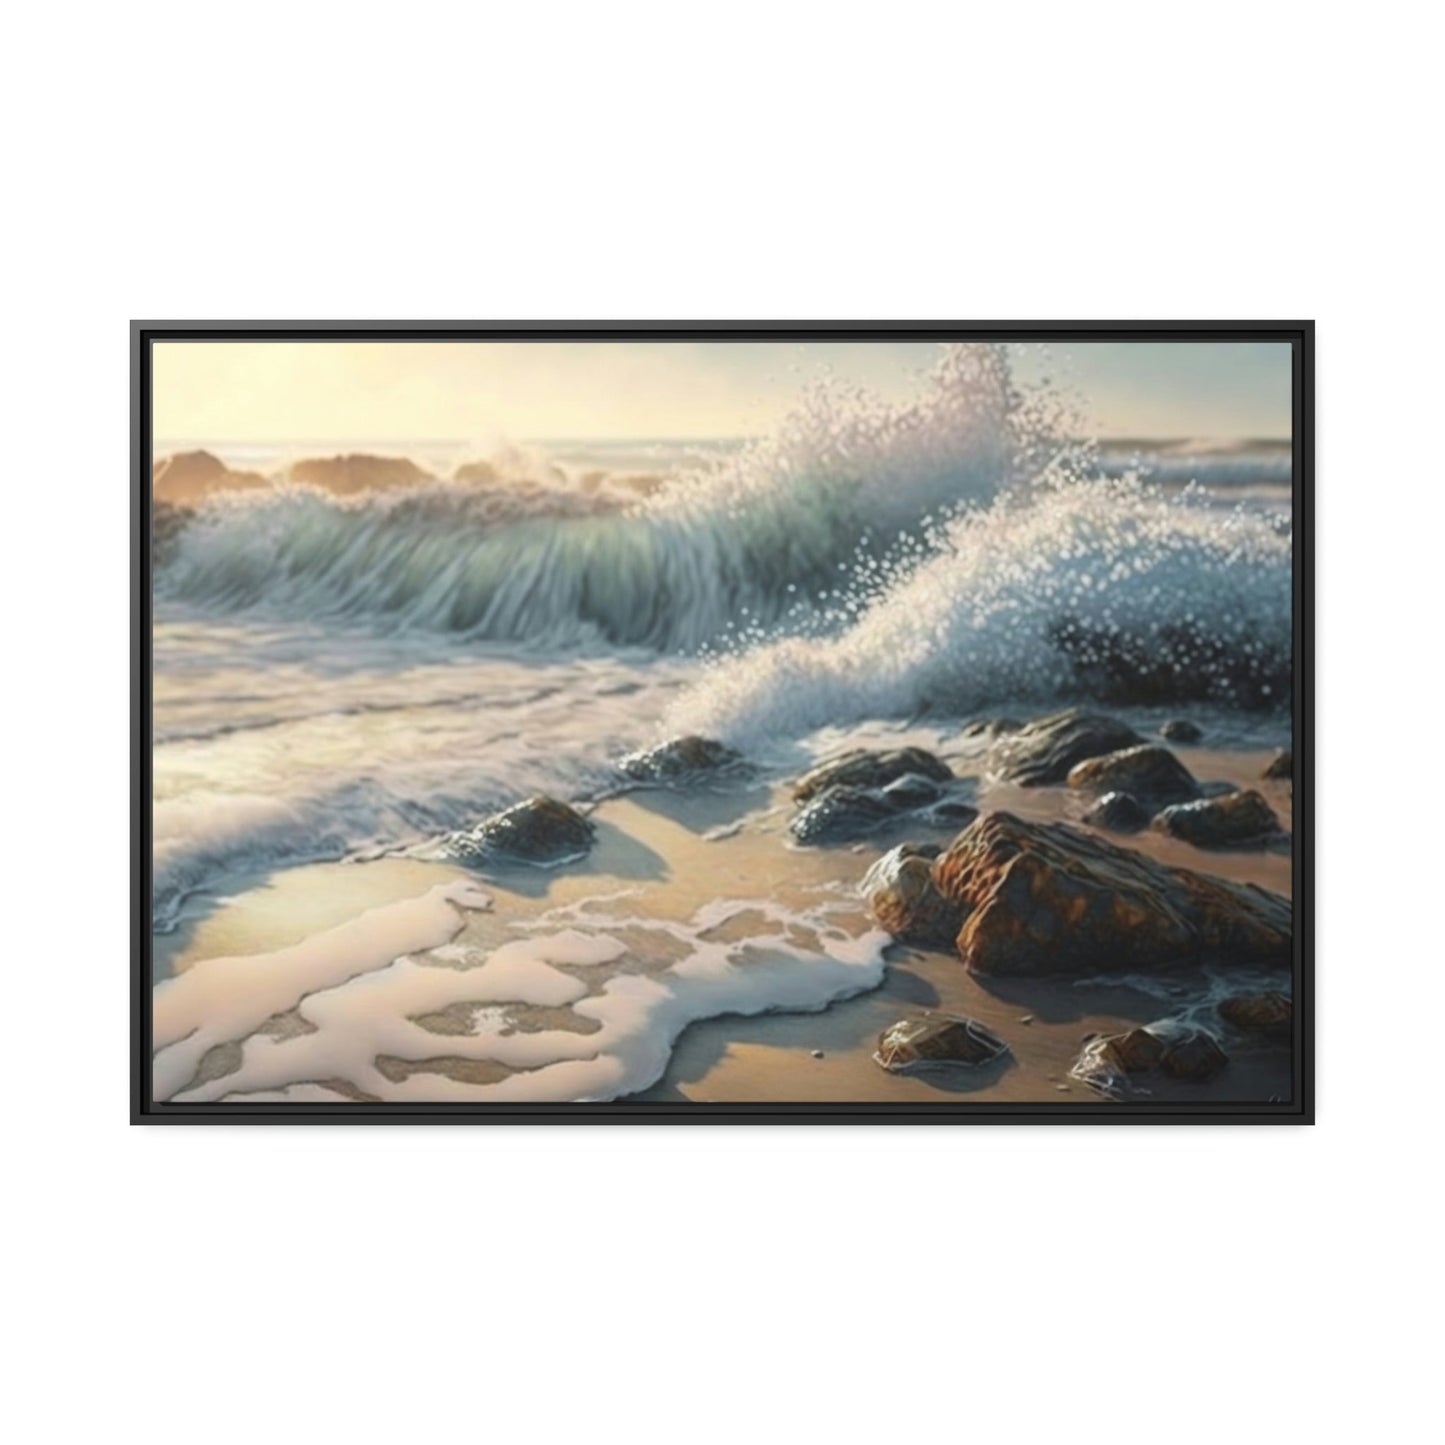 The Ocean's Edge: Framed Canvas & Poster of the Coastal Landscape